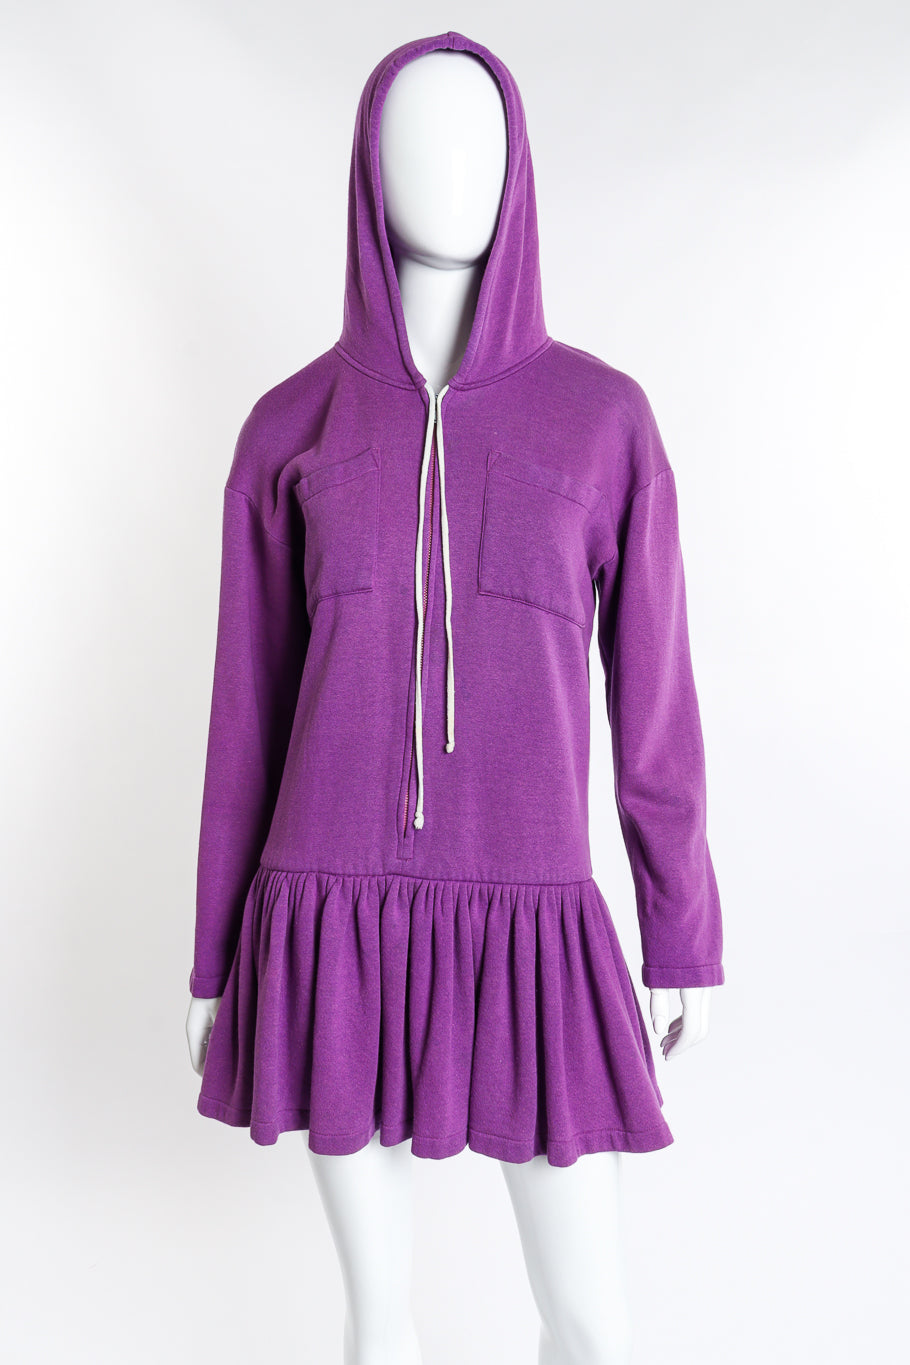 Vintage Norma Kamali Hooded Terry Dress front on mannequin hood up @recess la